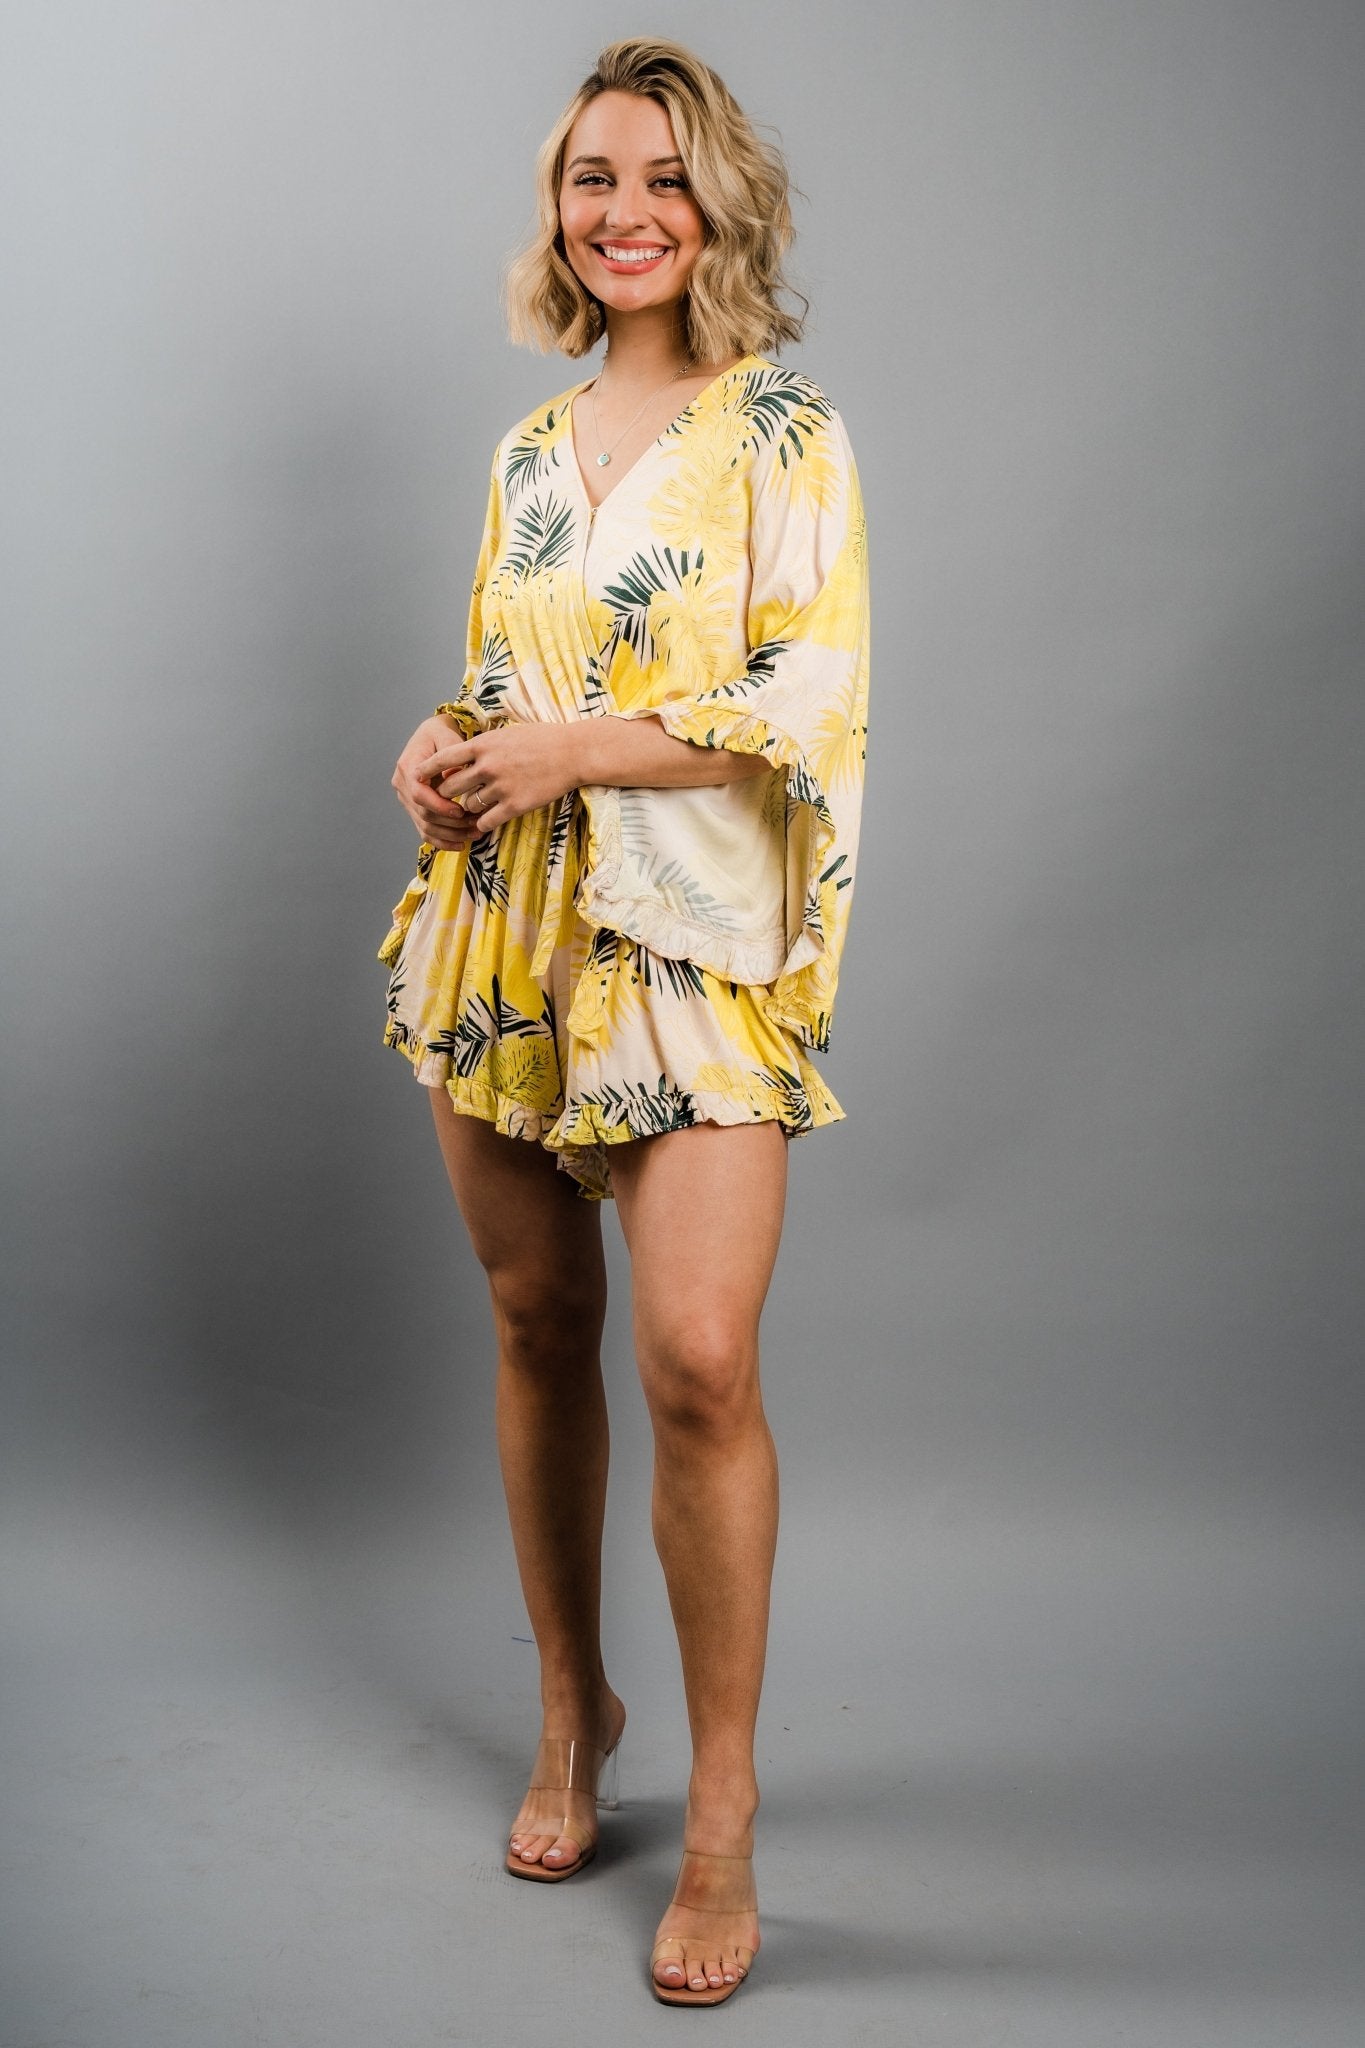 Ruffle tie waist tropical print romper apricot multi - Affordable Romper - Boutique Rompers & Pantsuits at Lush Fashion Lounge Boutique in Oklahoma City